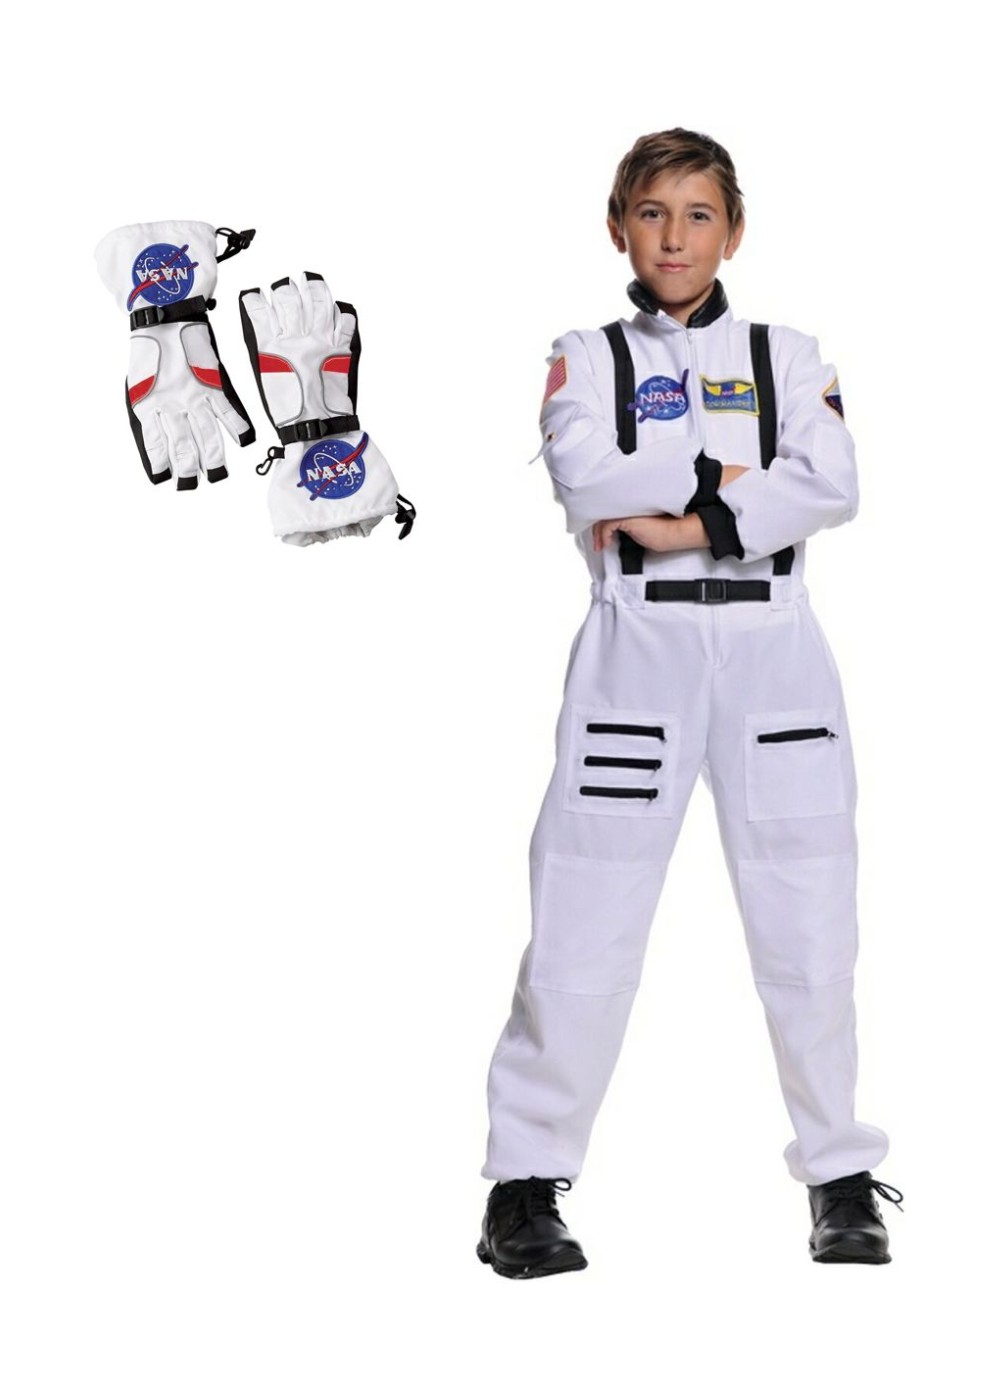 Boys Astronaut Costume And Gloves Set